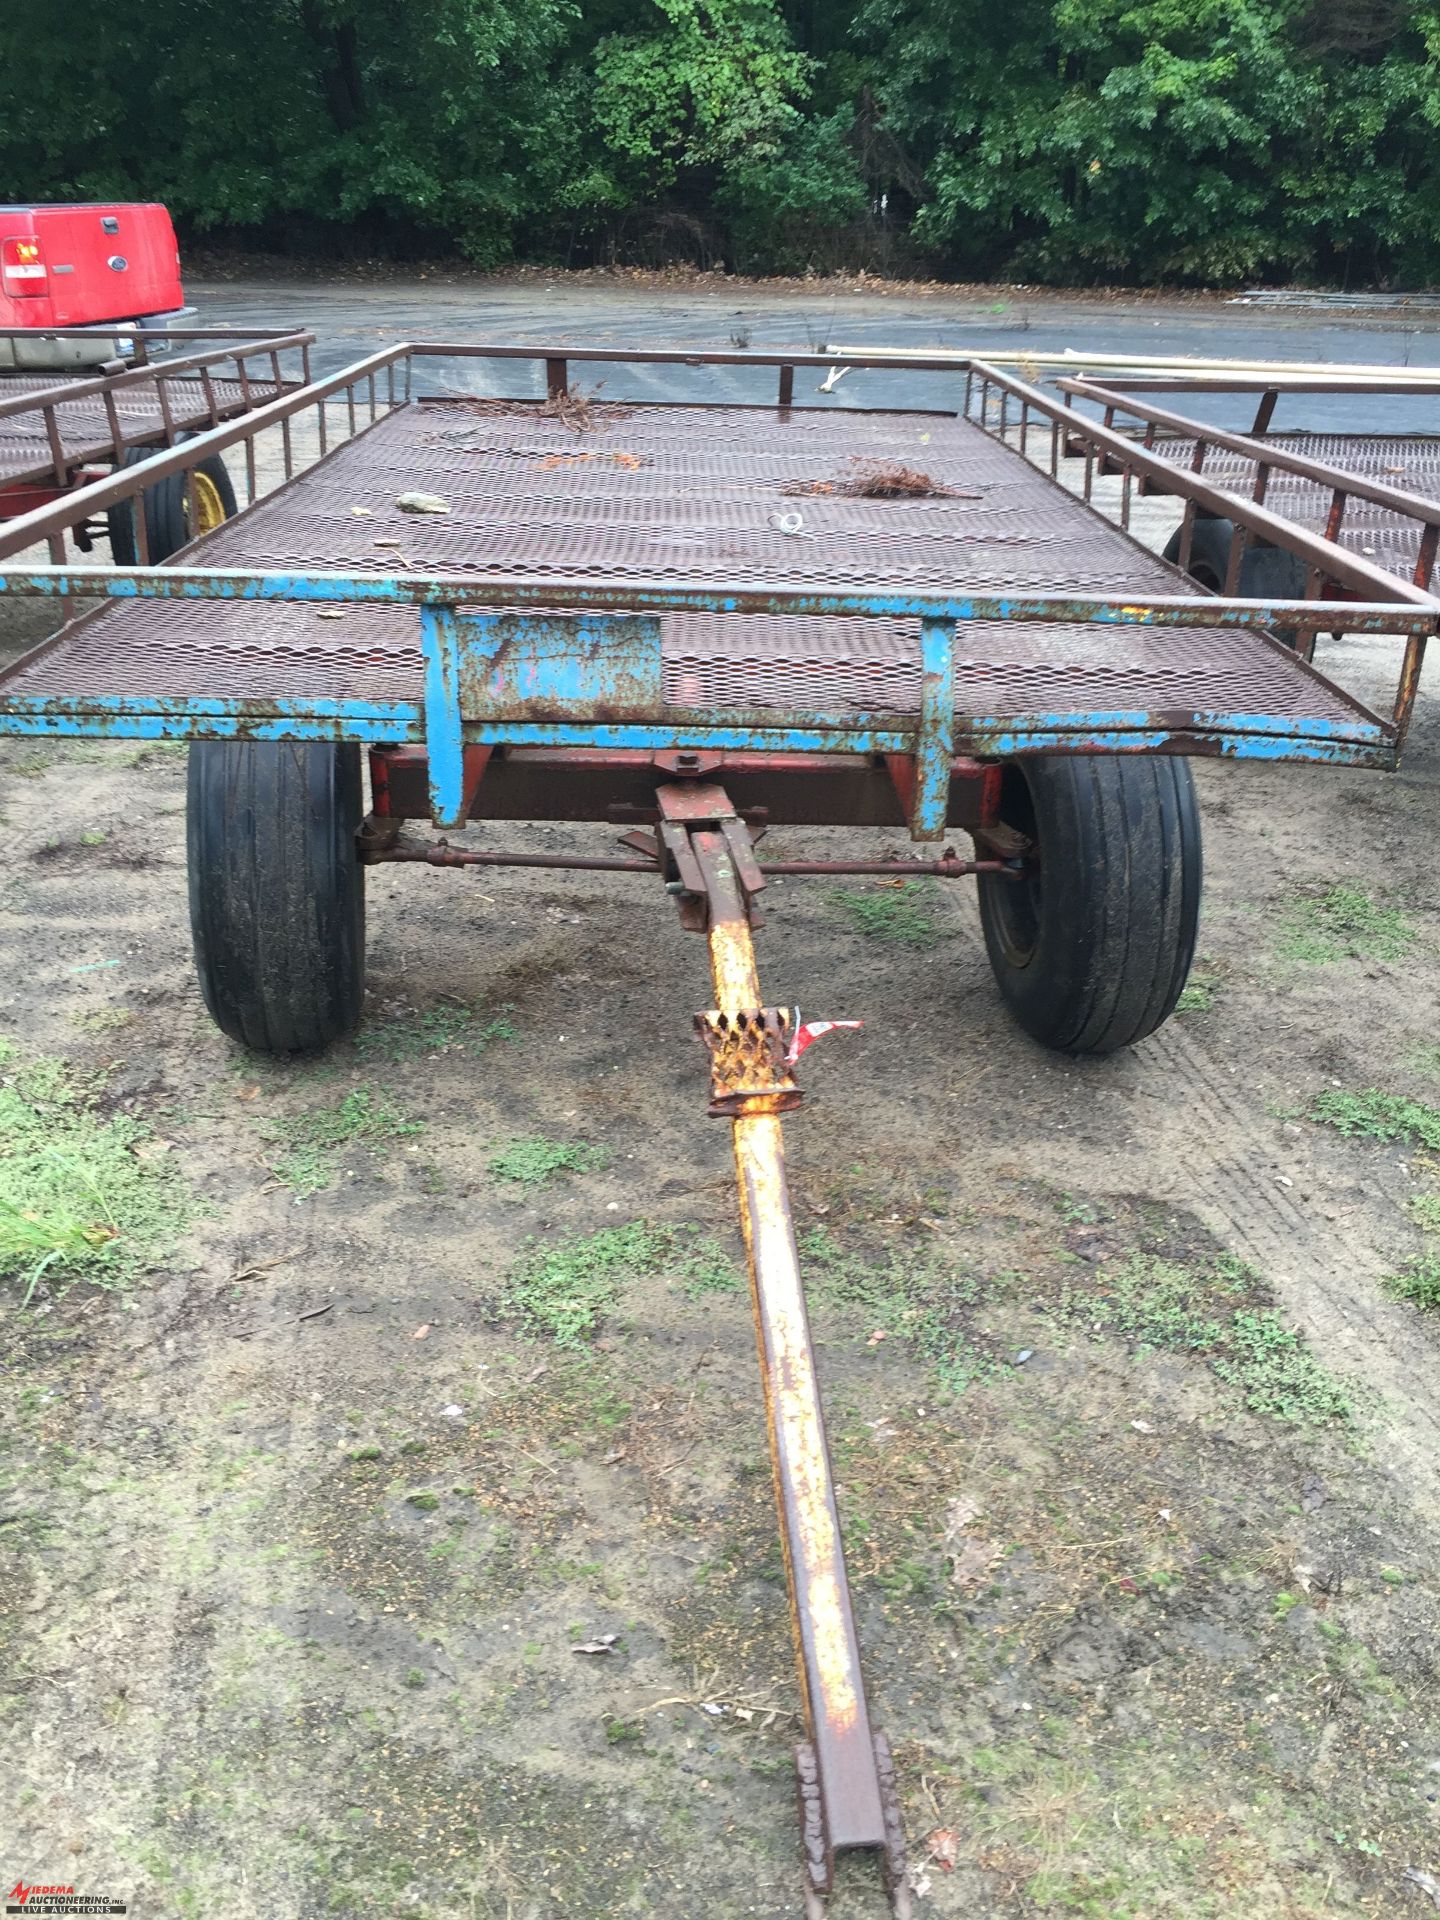 FLATBED WAGON, FIFTH WHEEL STYLE STEERING, 7' WIDE x 14' LONG, METAL DECK, FOR FARM USE ONLY [